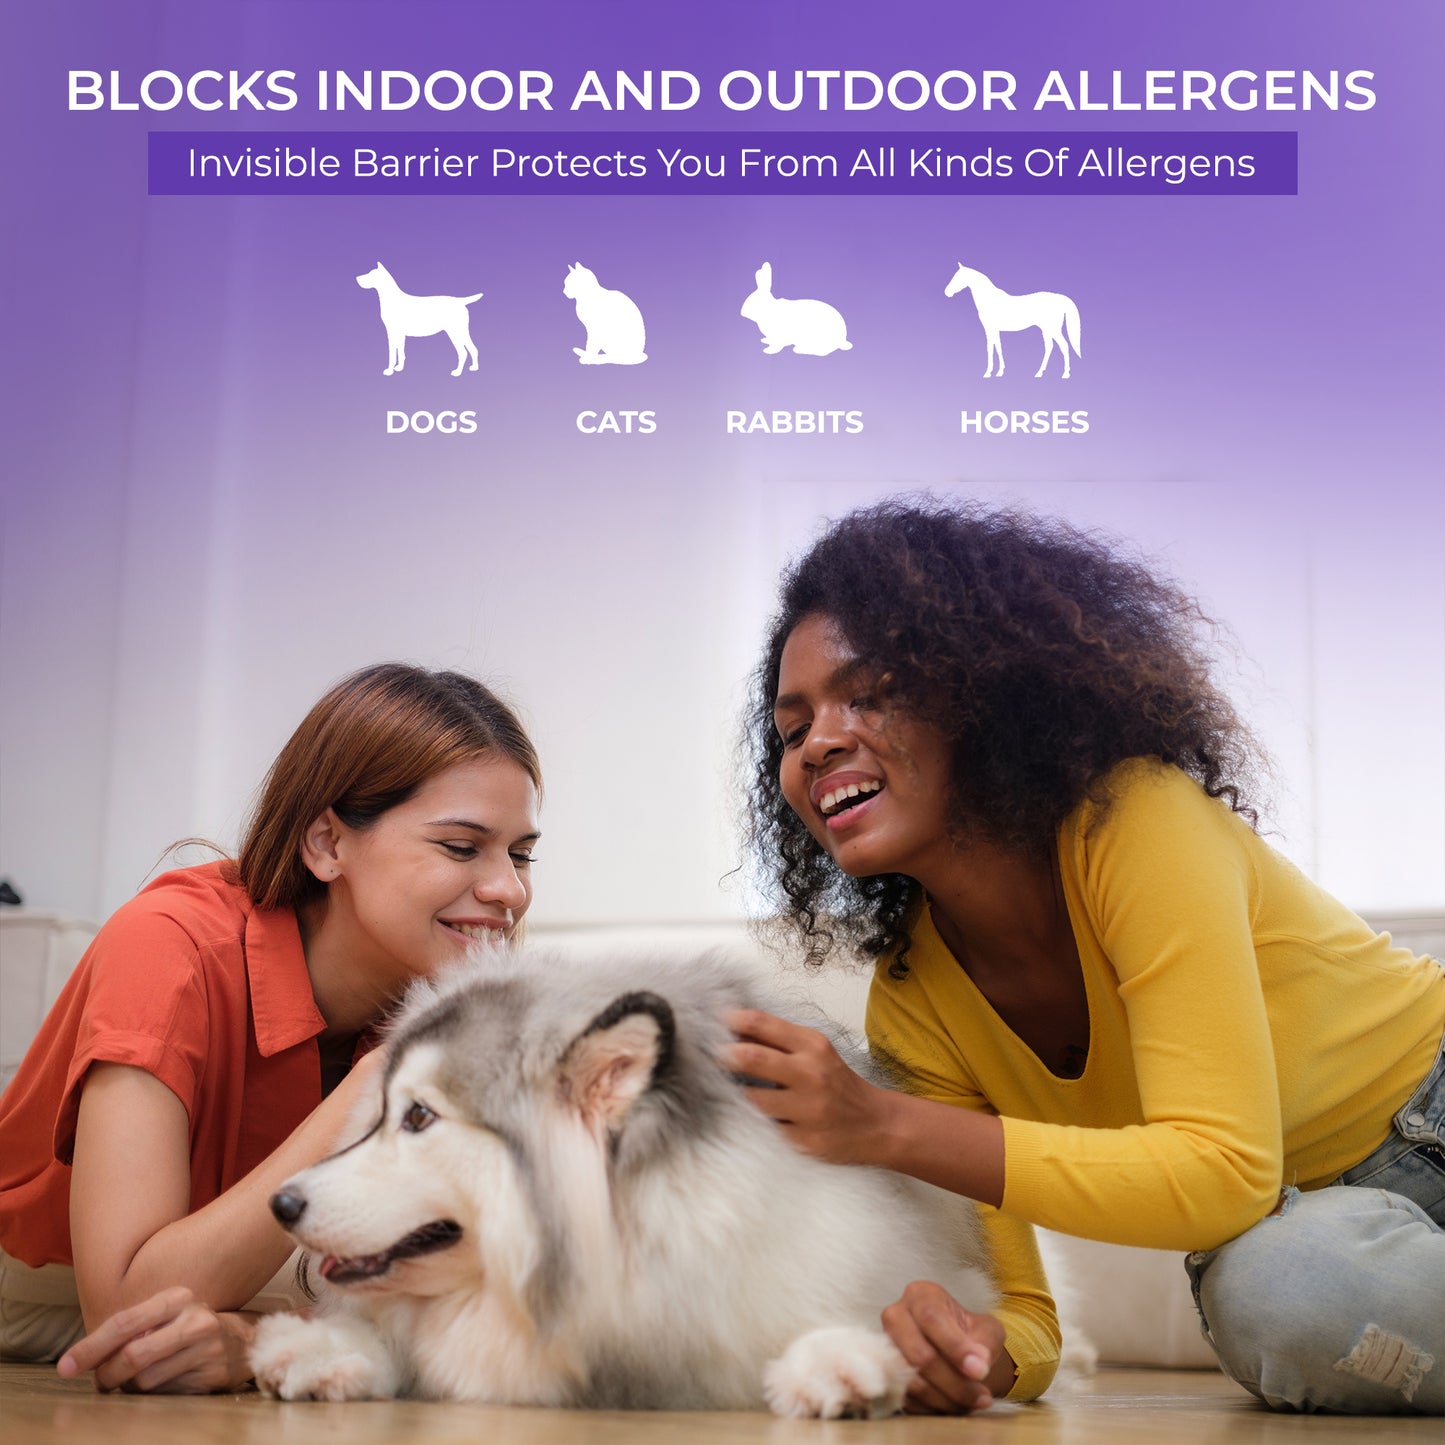 NasalGuard For Pet Lovers, Airborne Particle Blocker | Unscented | 10g Tube